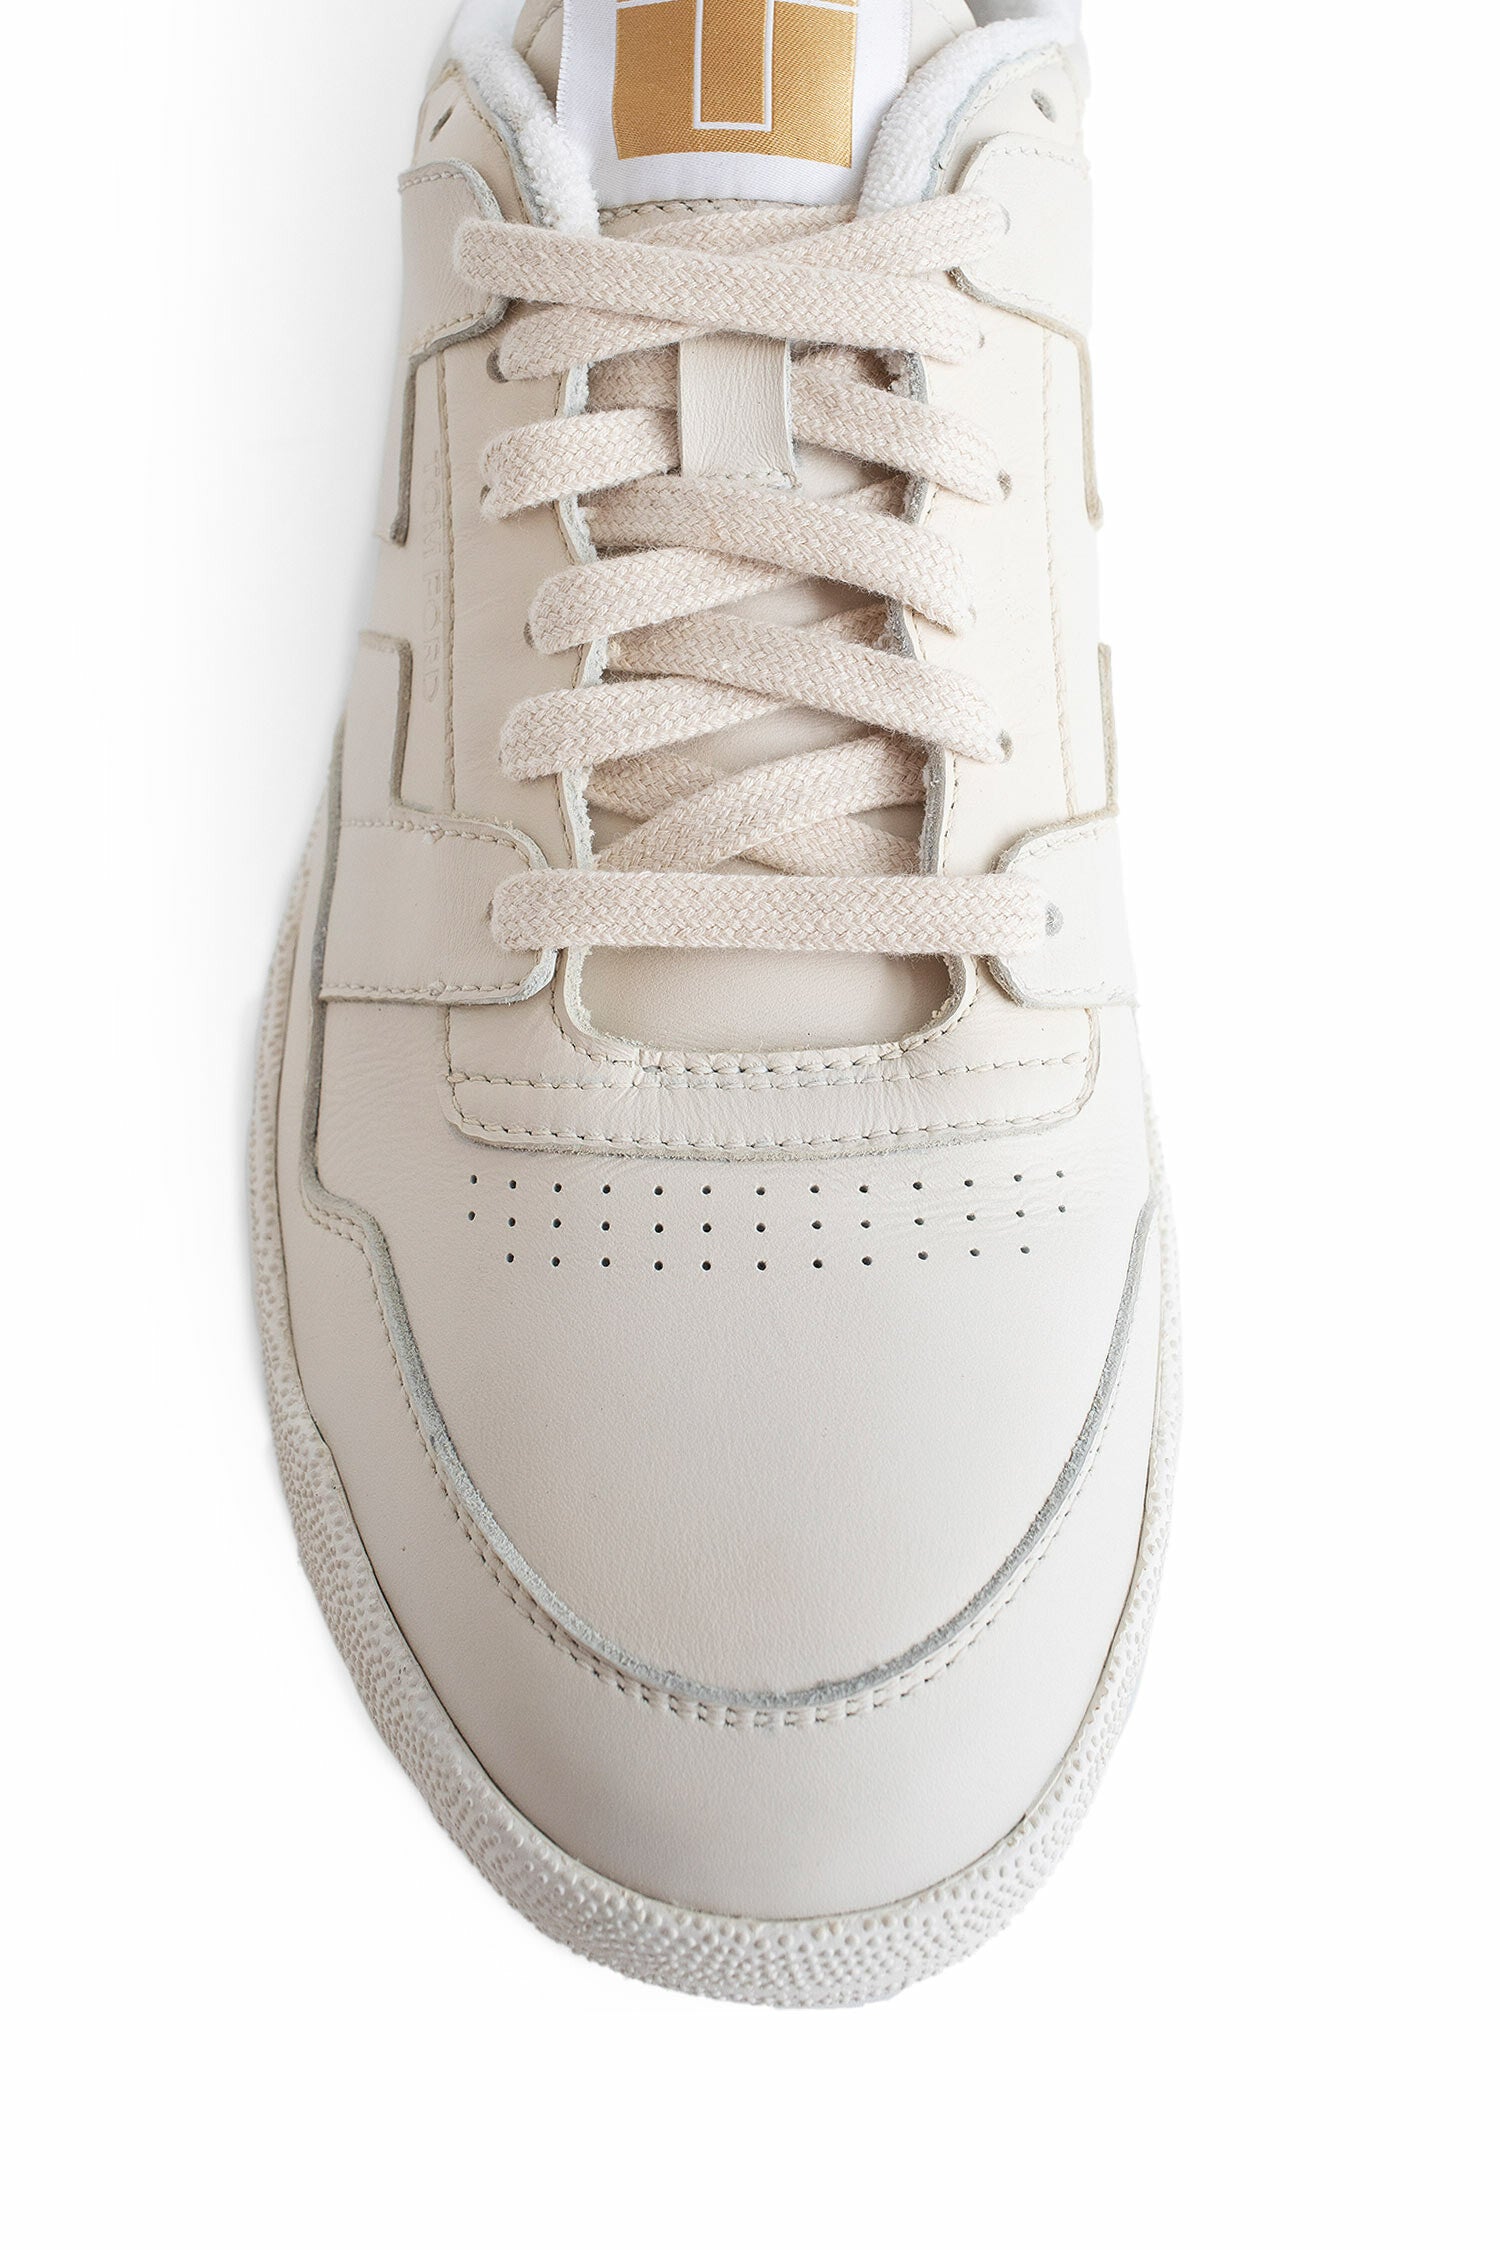 TOM FORD MAN OFF-WHITE SNEAKERS